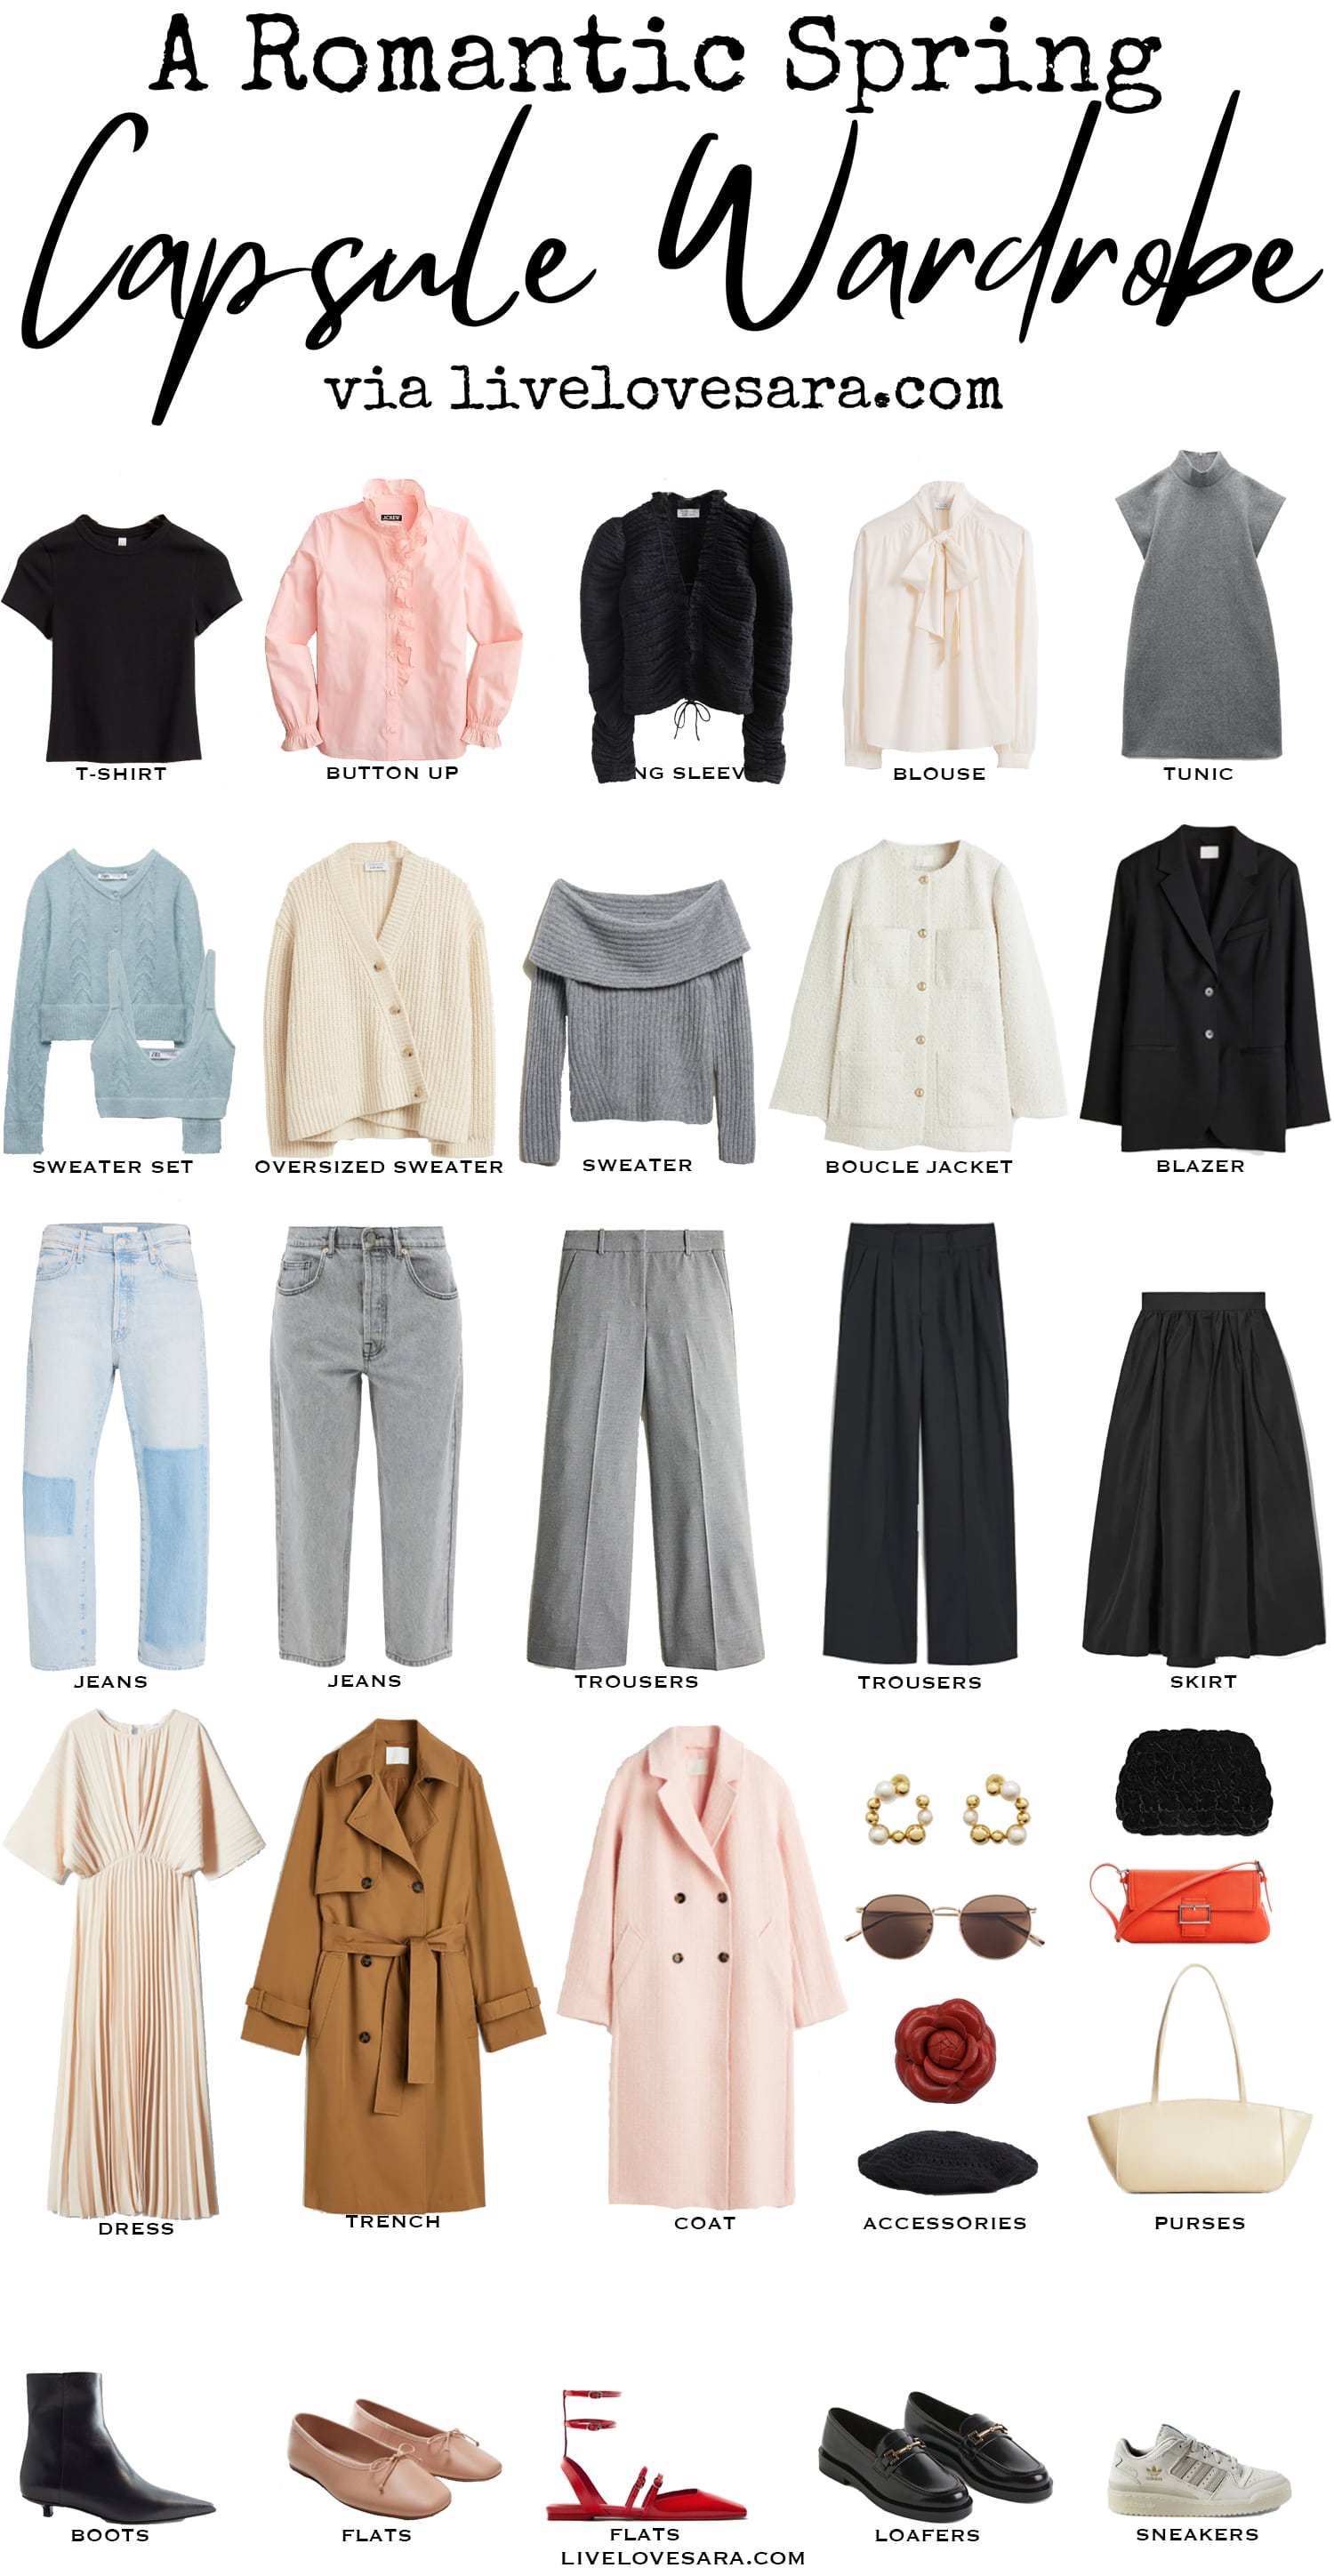 A white background with 30 items including clothes, shoes and accessories from A Romantic Capsule Wardrobe for Spring.